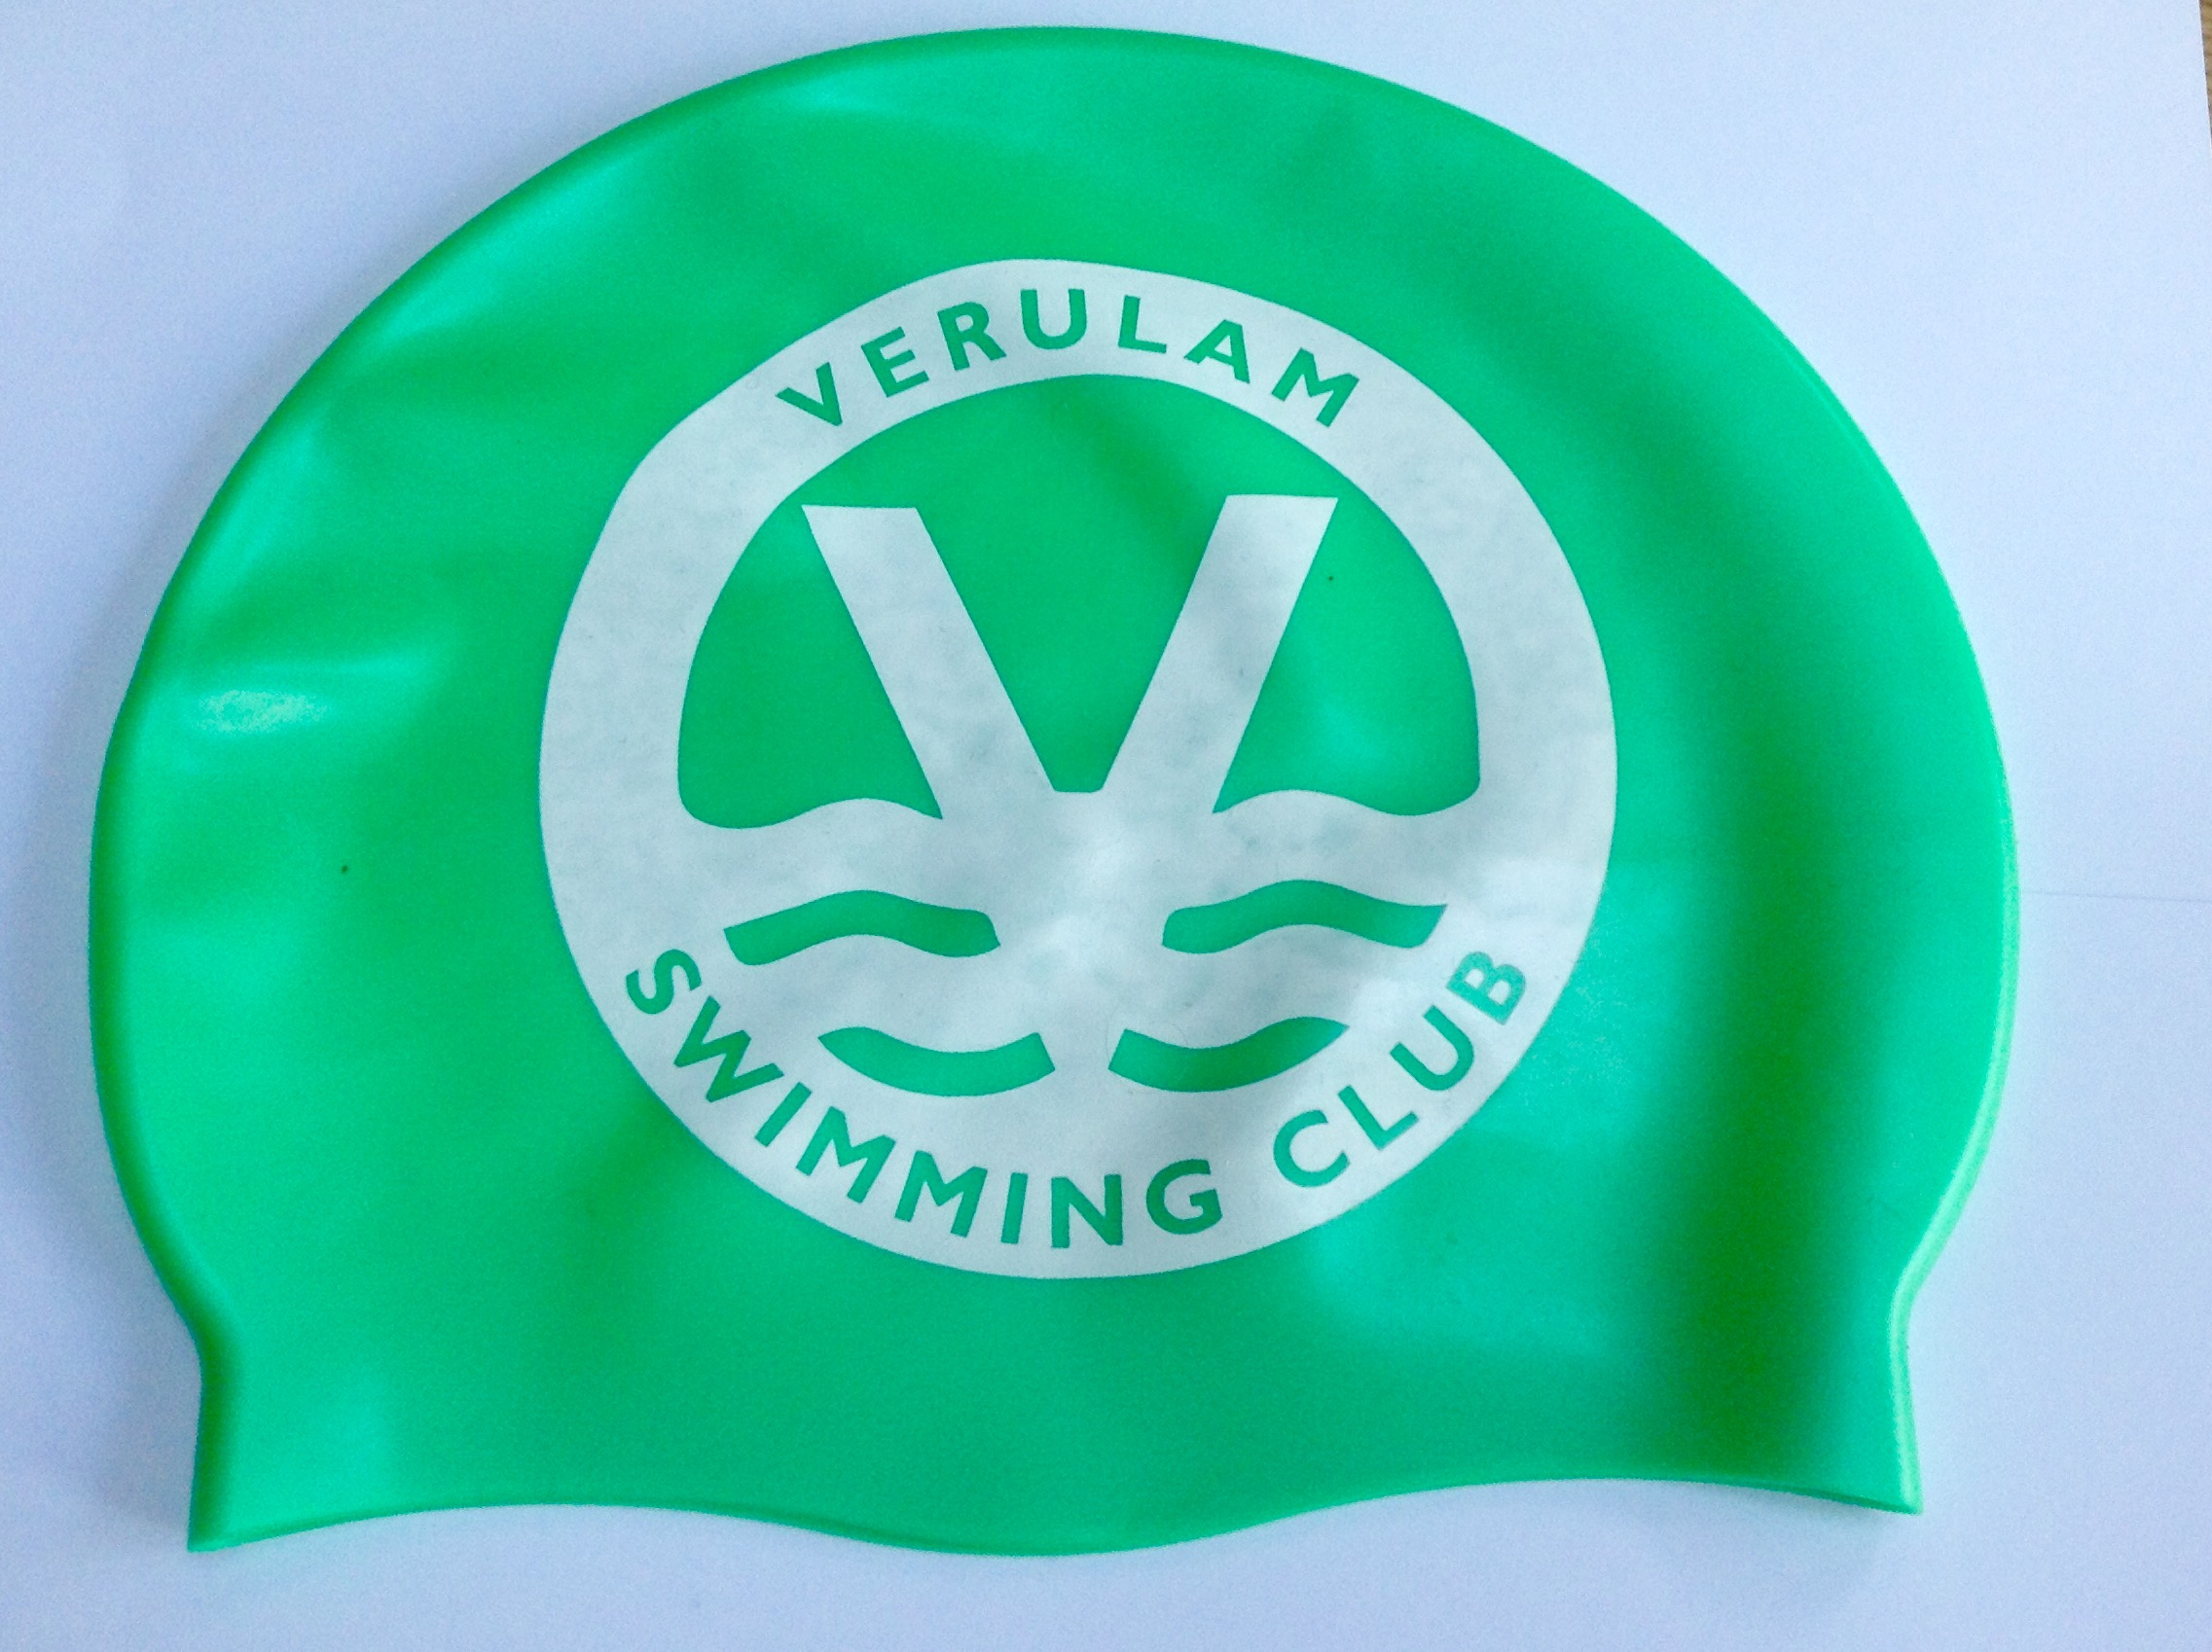 Caps & Kit for Swimmers – Verulam Amateur Swimming Club